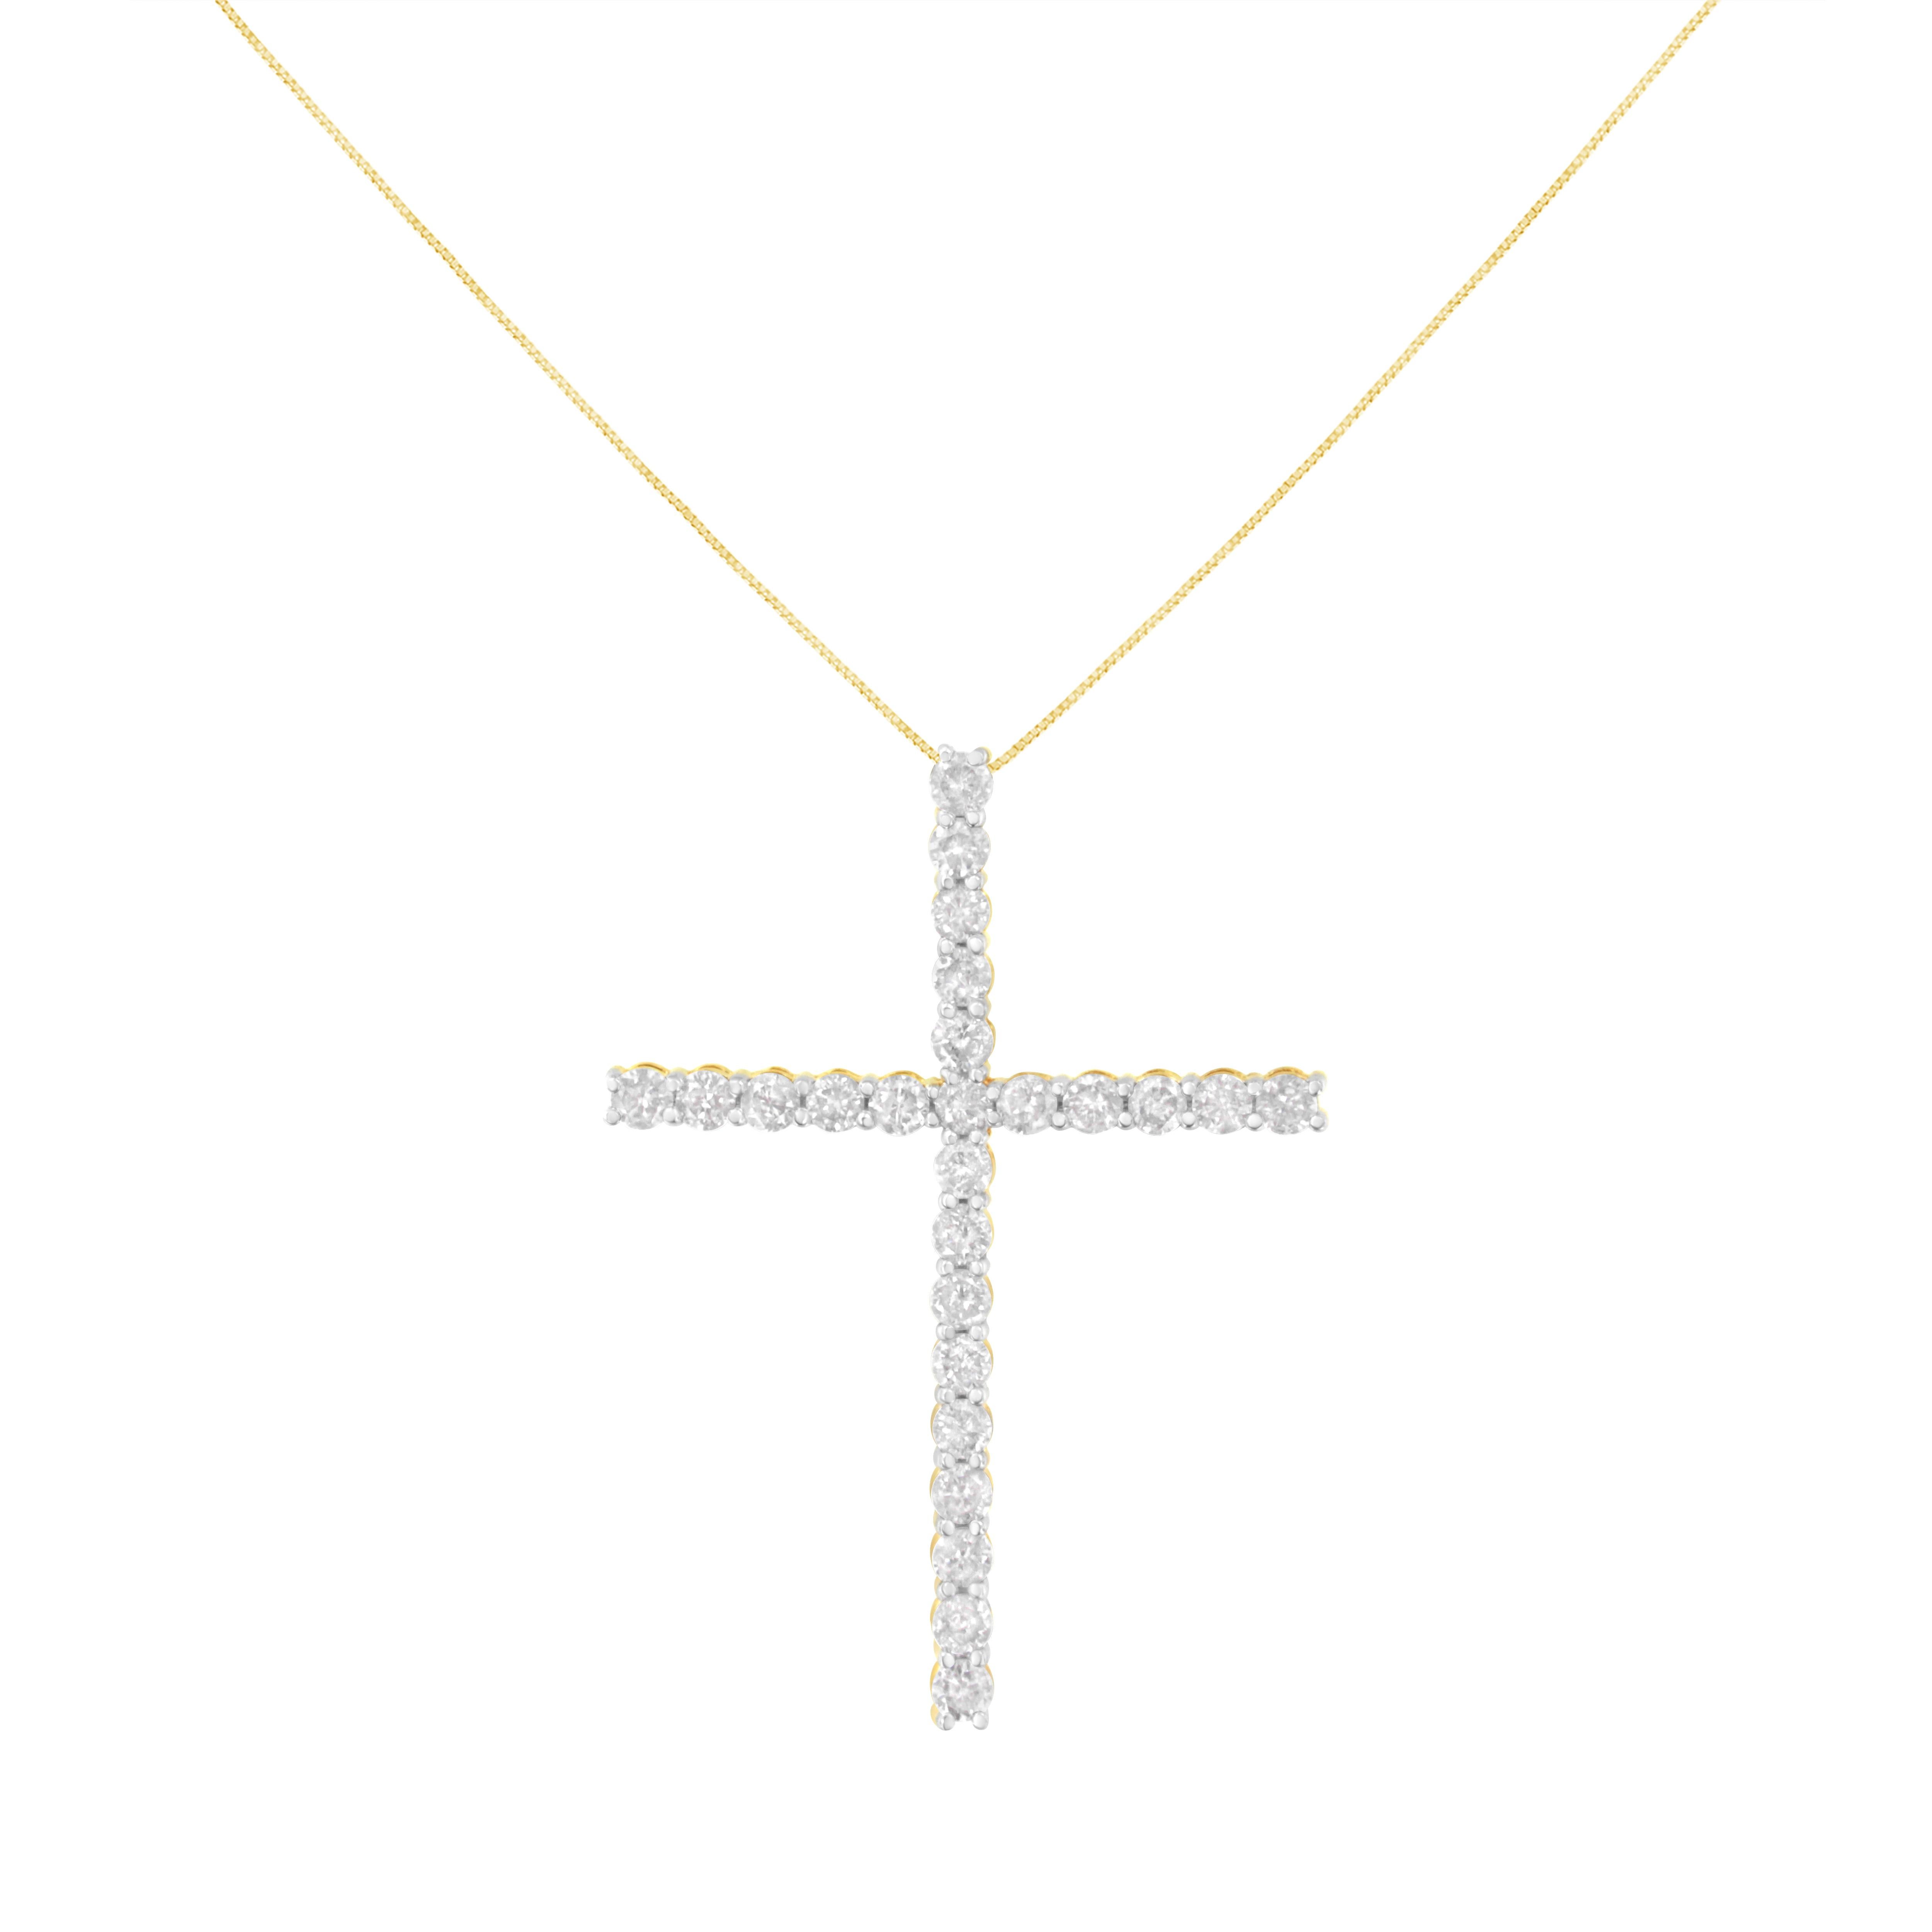 Share your faith with this stunning diamond cross pendant necklace. This cherished cross necklace for her, features 25 natural, round diamonds set in 2 Micron 10k Yellow Gold Plated Sterling Silver. The pendant is suspended from an 18-inch box chain